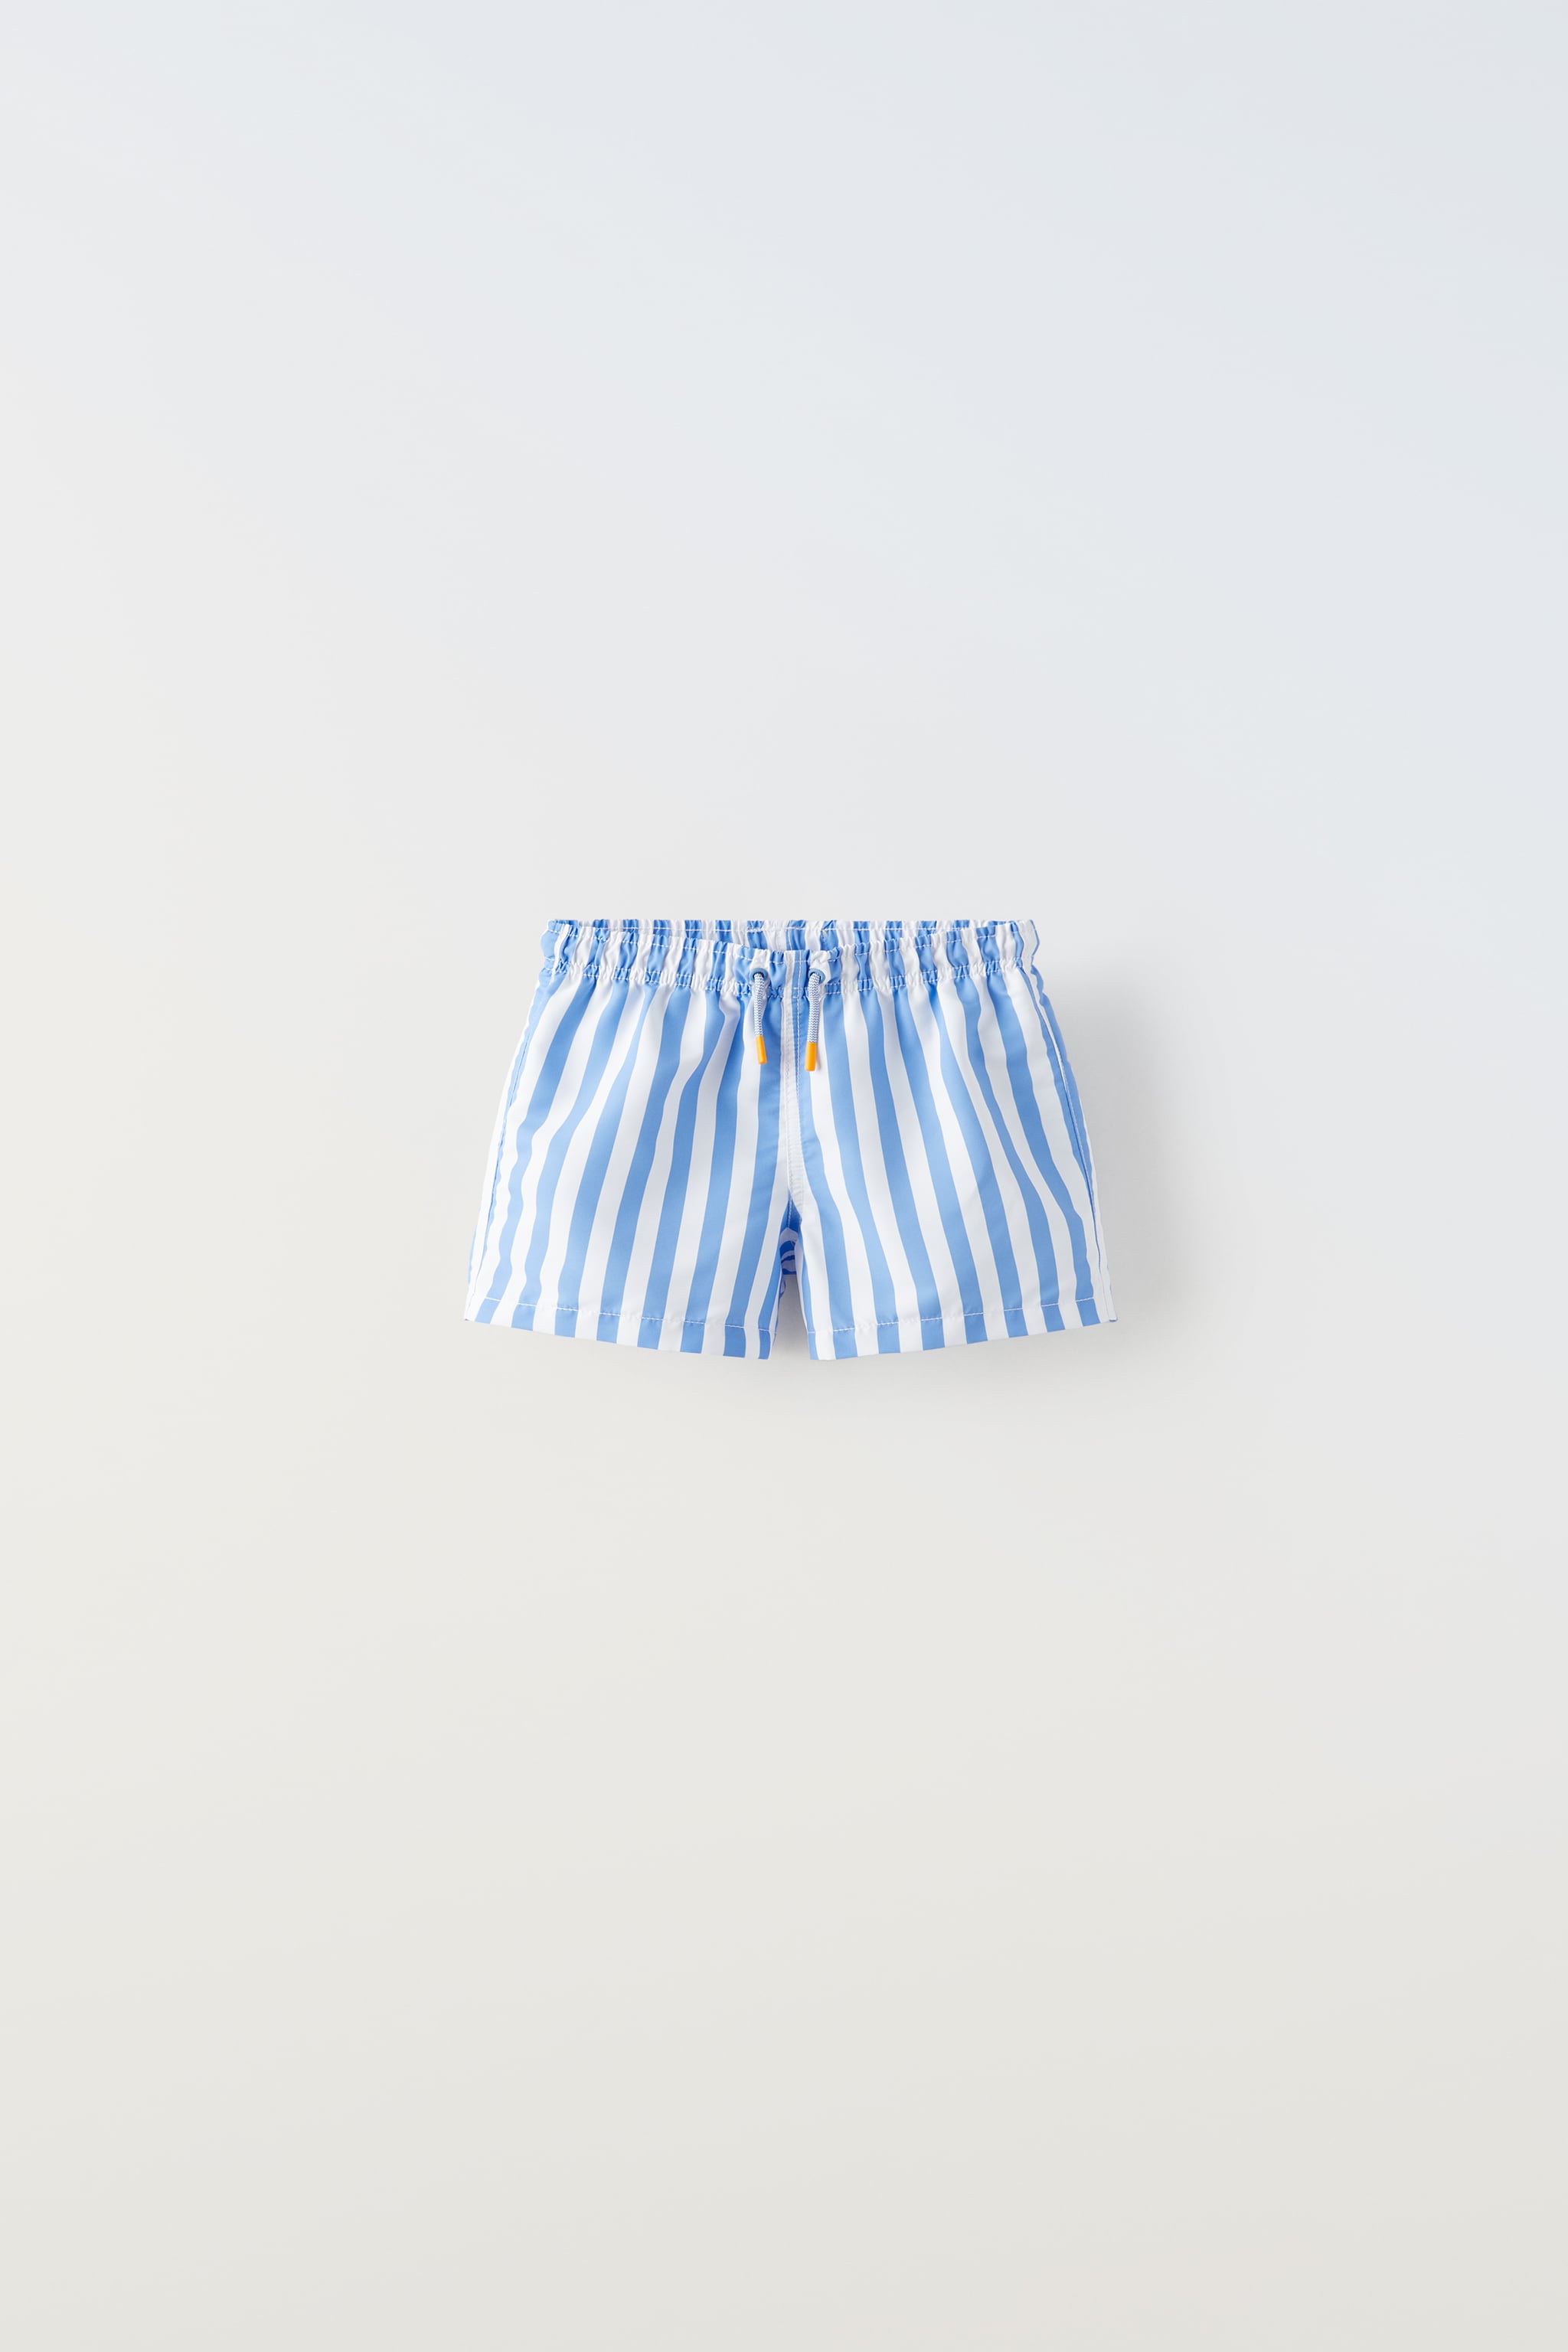 6 MONTHS - YEARS/ WIDE STRIPE SWIMSUIT